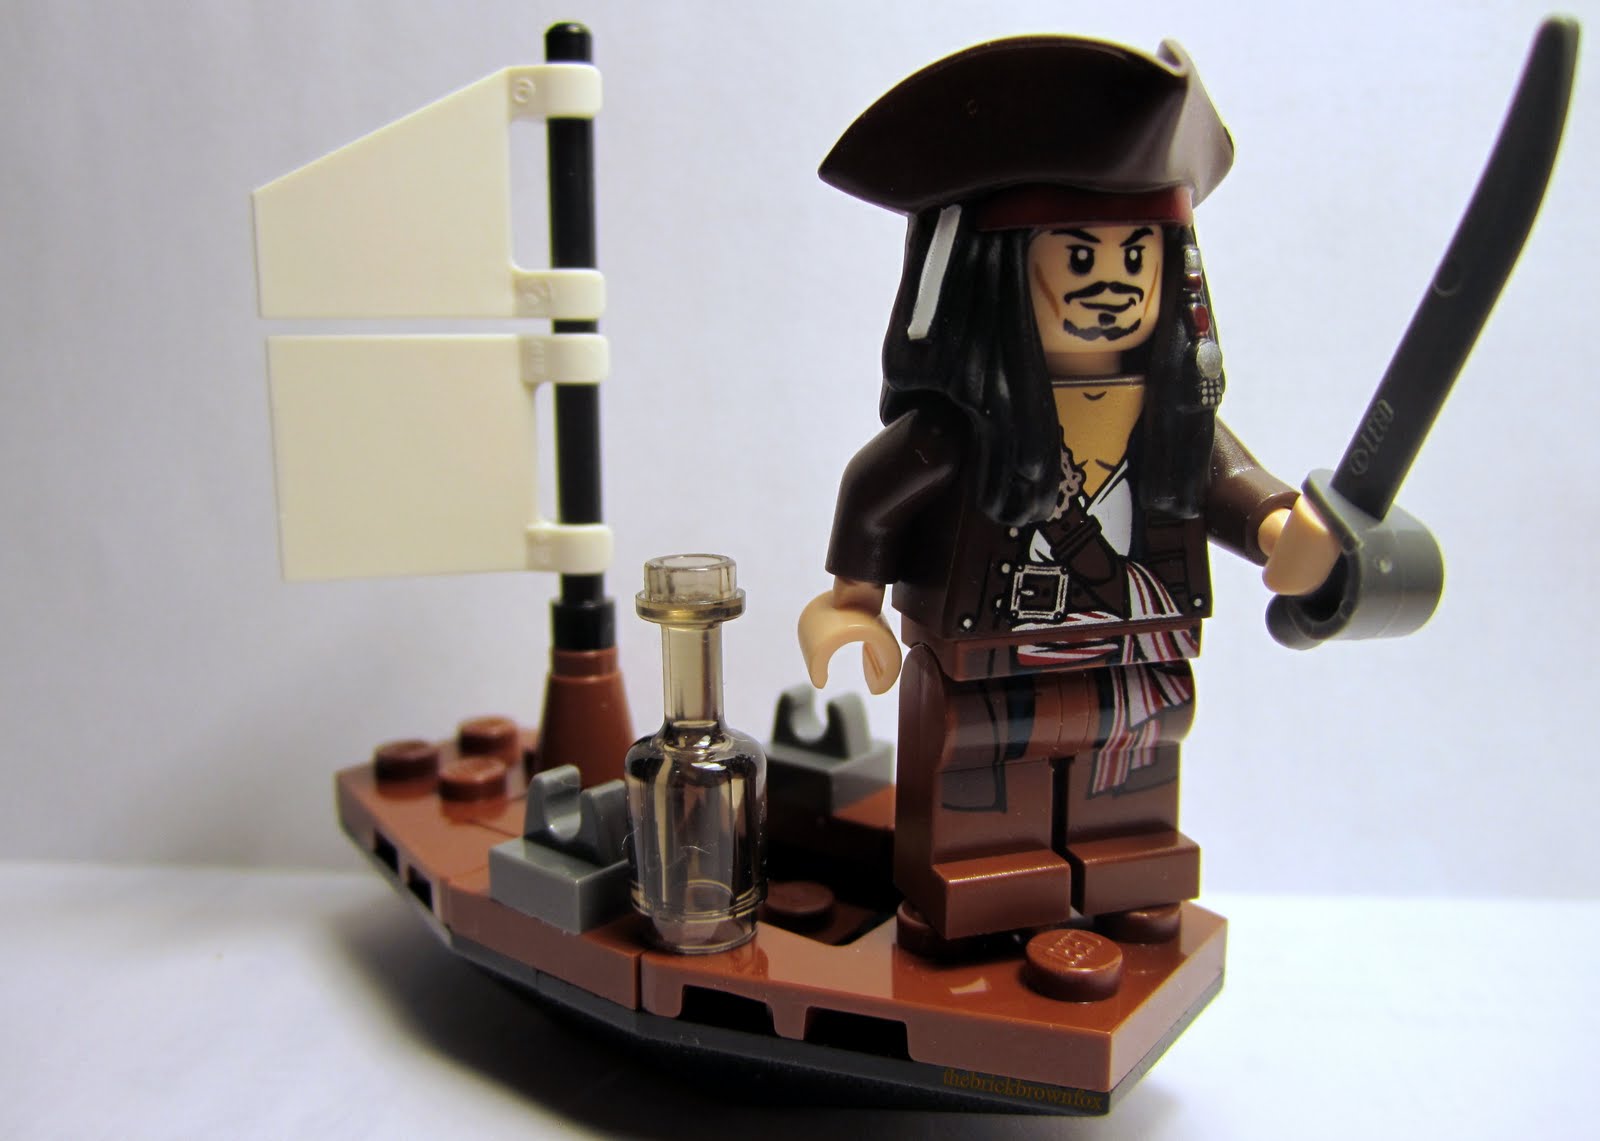  Brown Fox: Lego Pirates of the Caribbean 30131 - Jack Sparrow's Boat